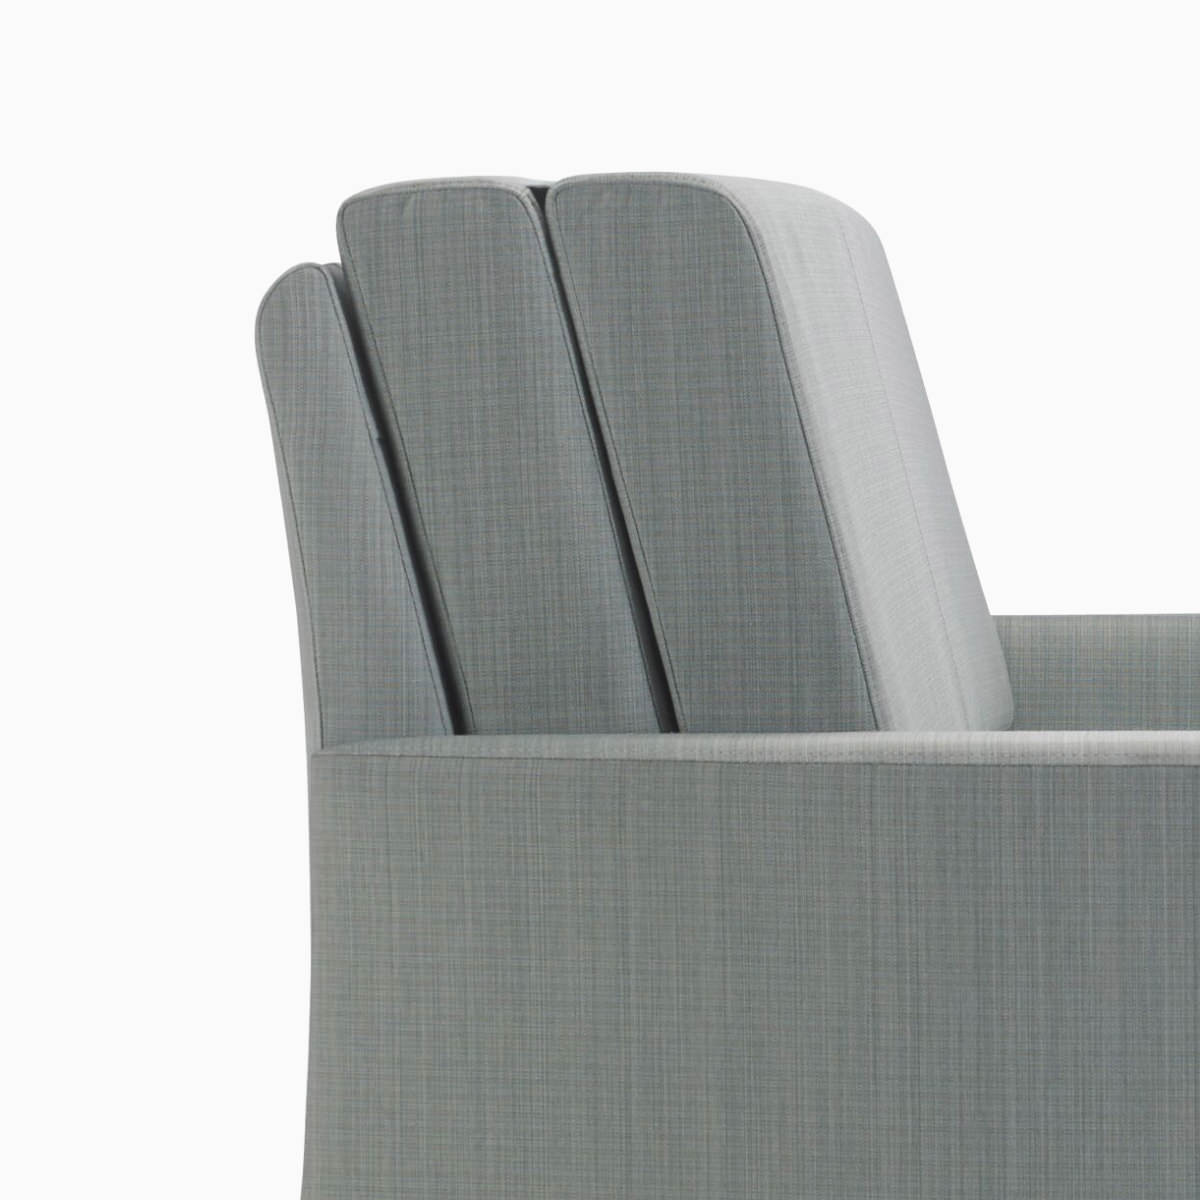 Nemschoff Pamona Flop Sofa in gray textile with a cropped view of the continuous back cushion.